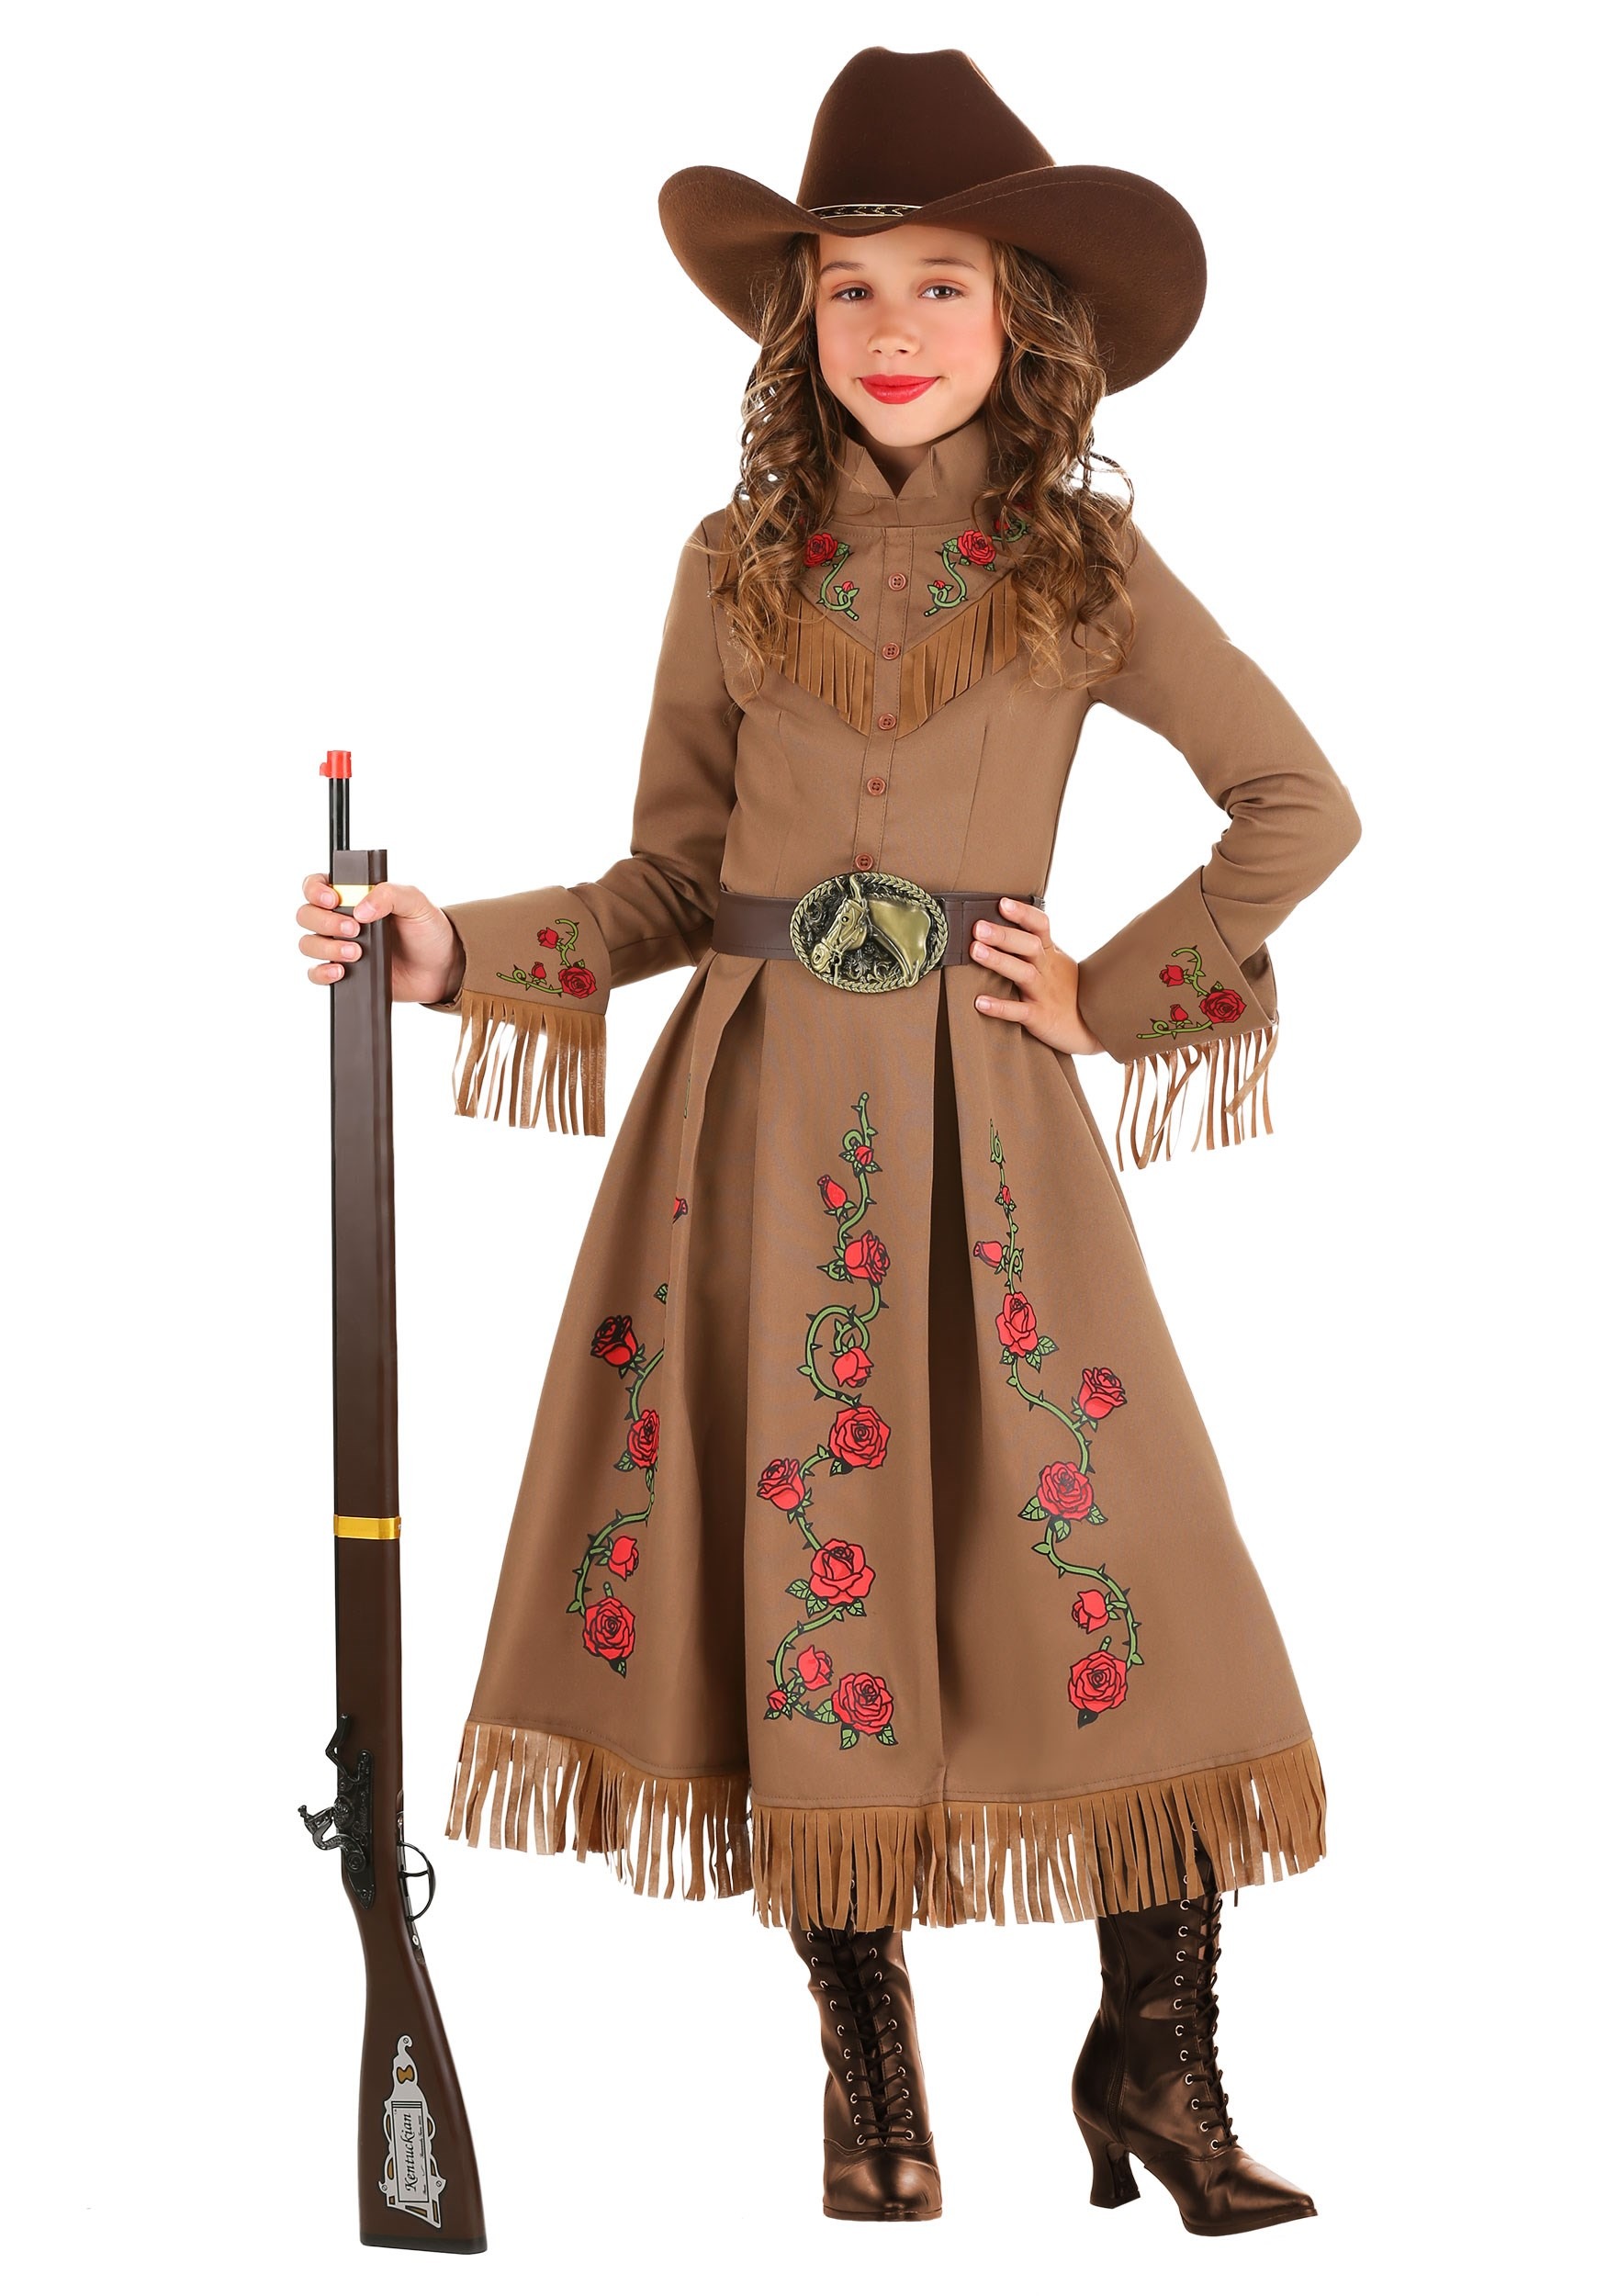 Annie Oakley Cowgirl Costume for Girls